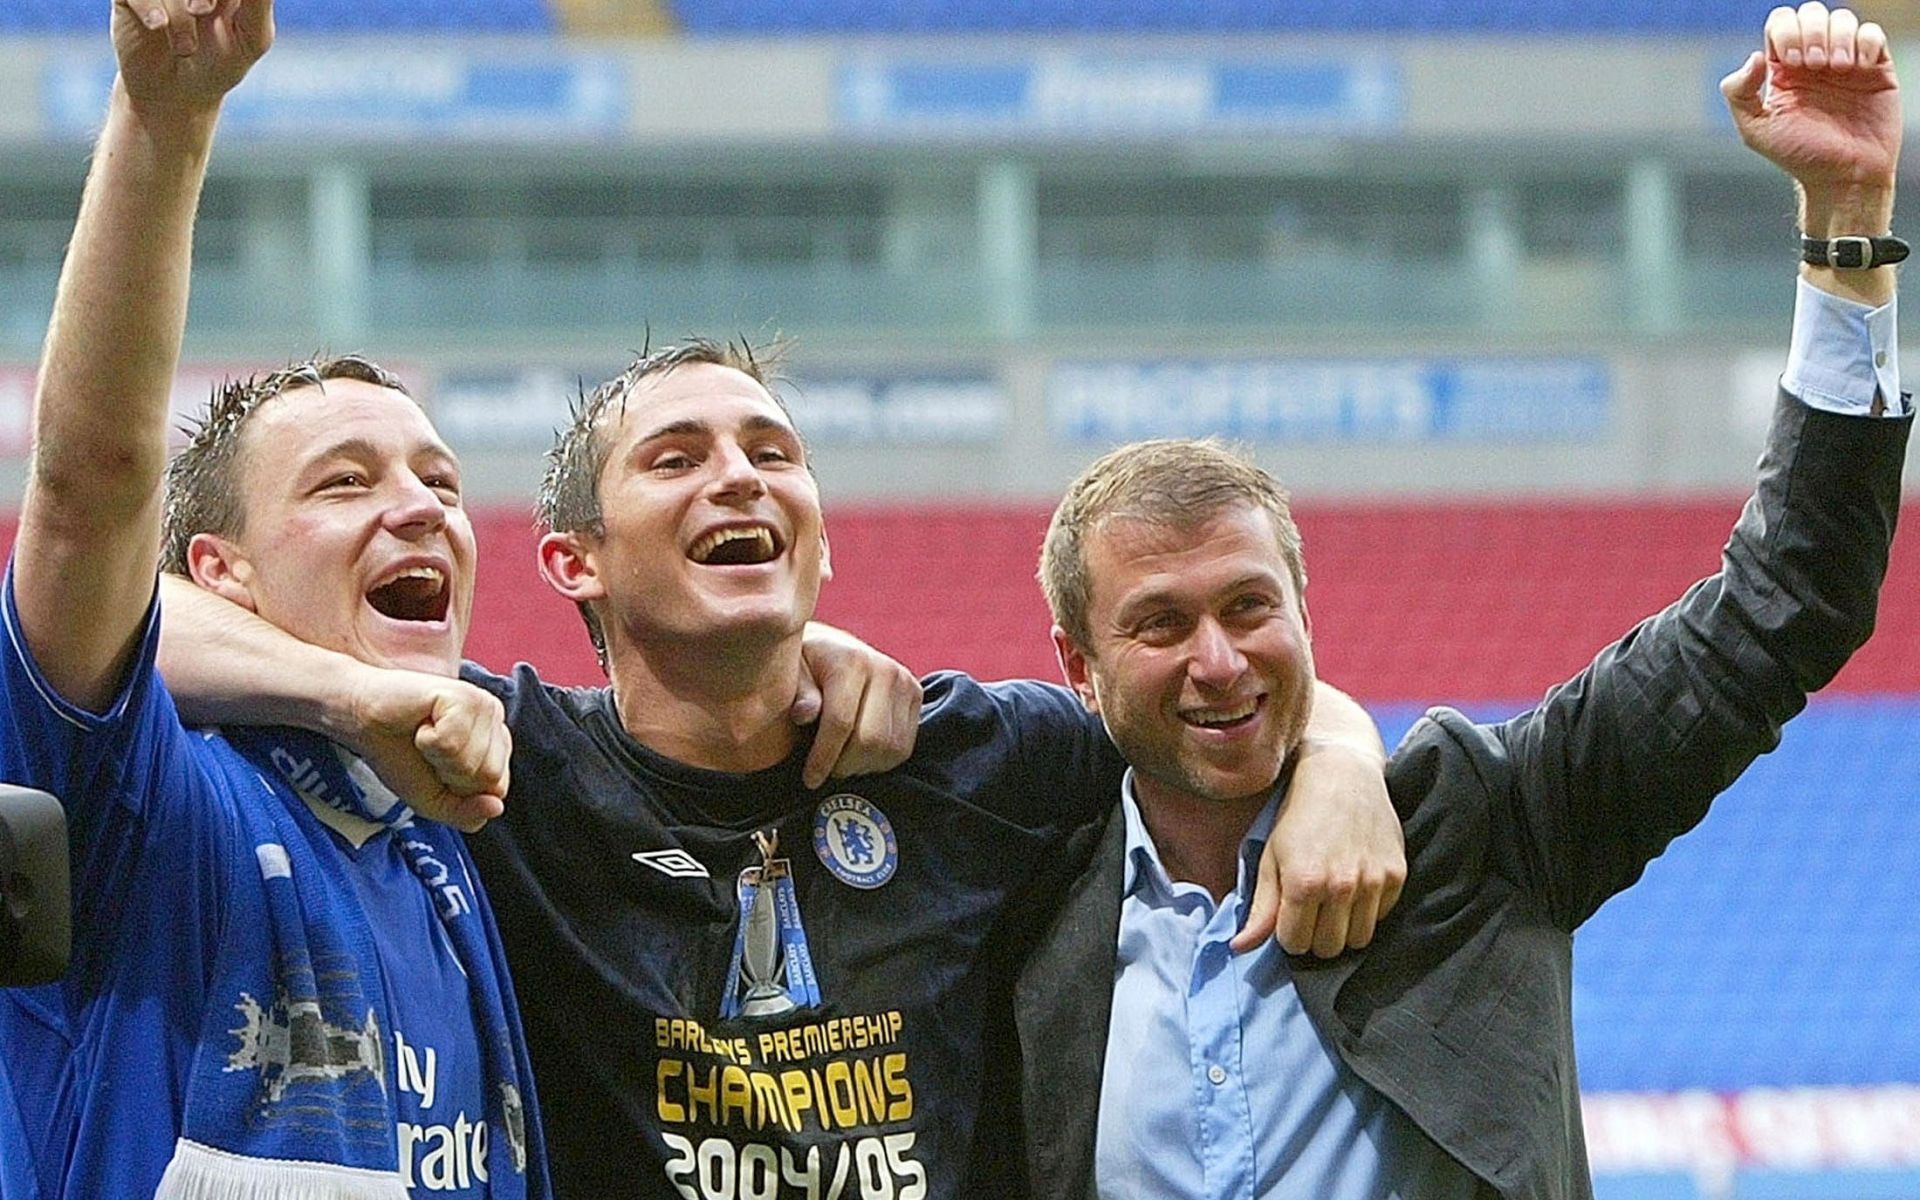 Lampard has previously commented on relationship with Abramovich